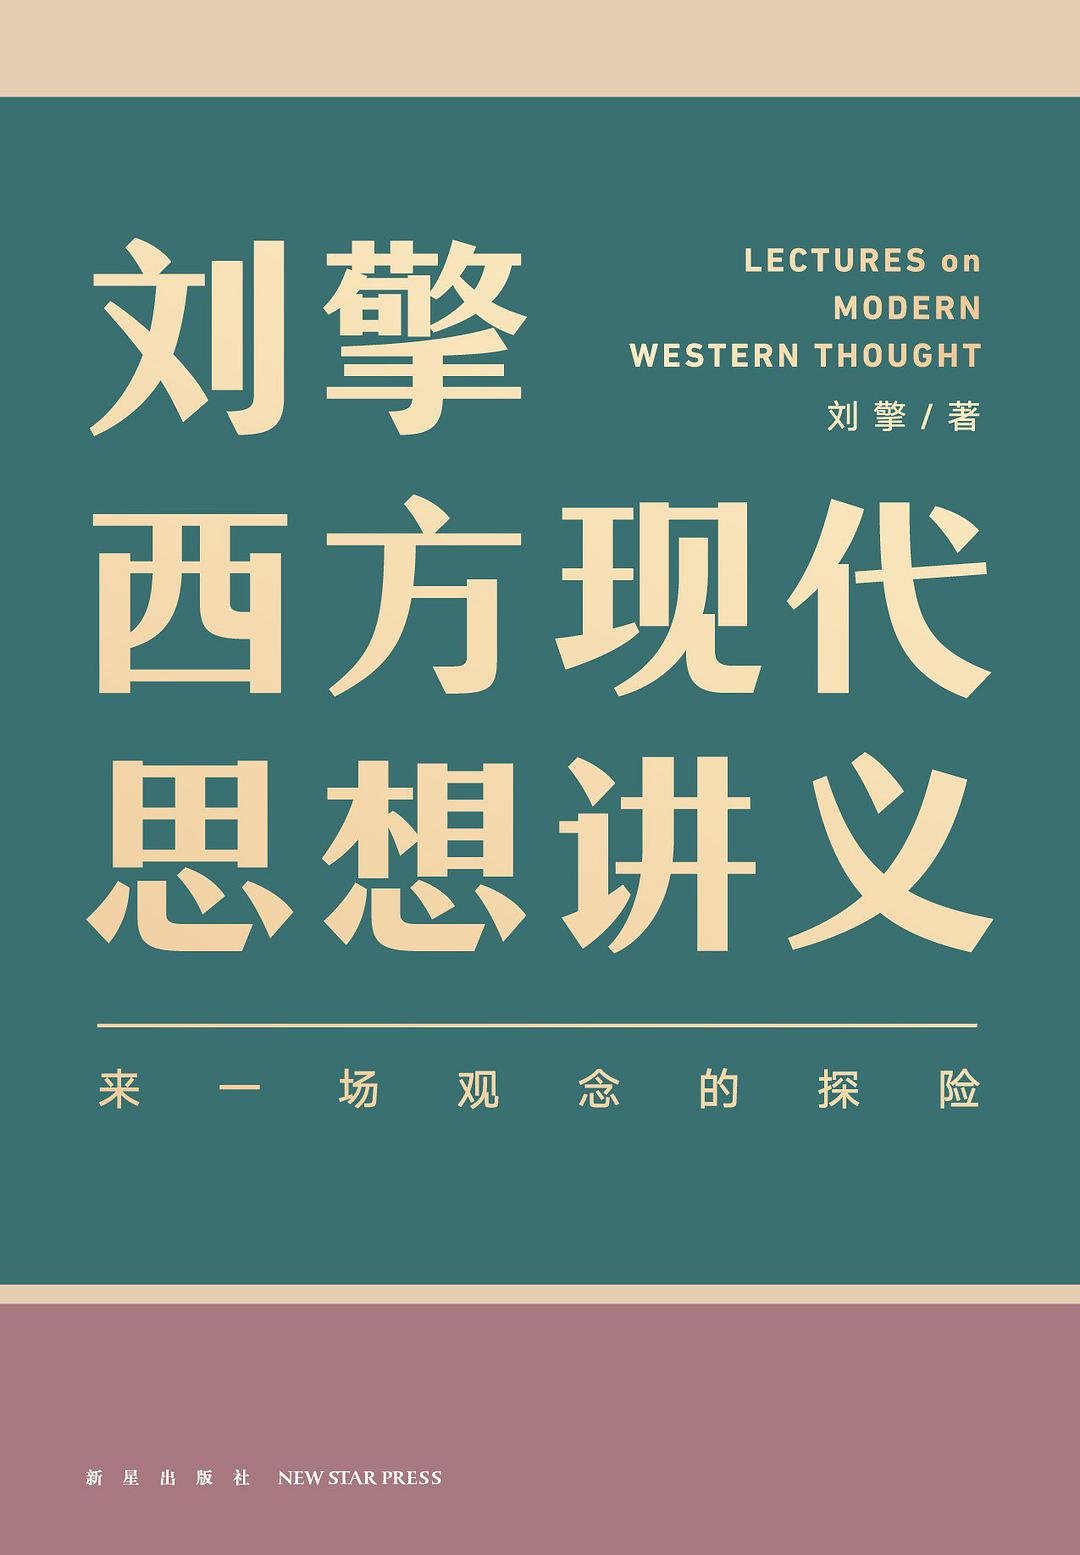 Ten of the Best Chinese Books in Translation – China Exchange